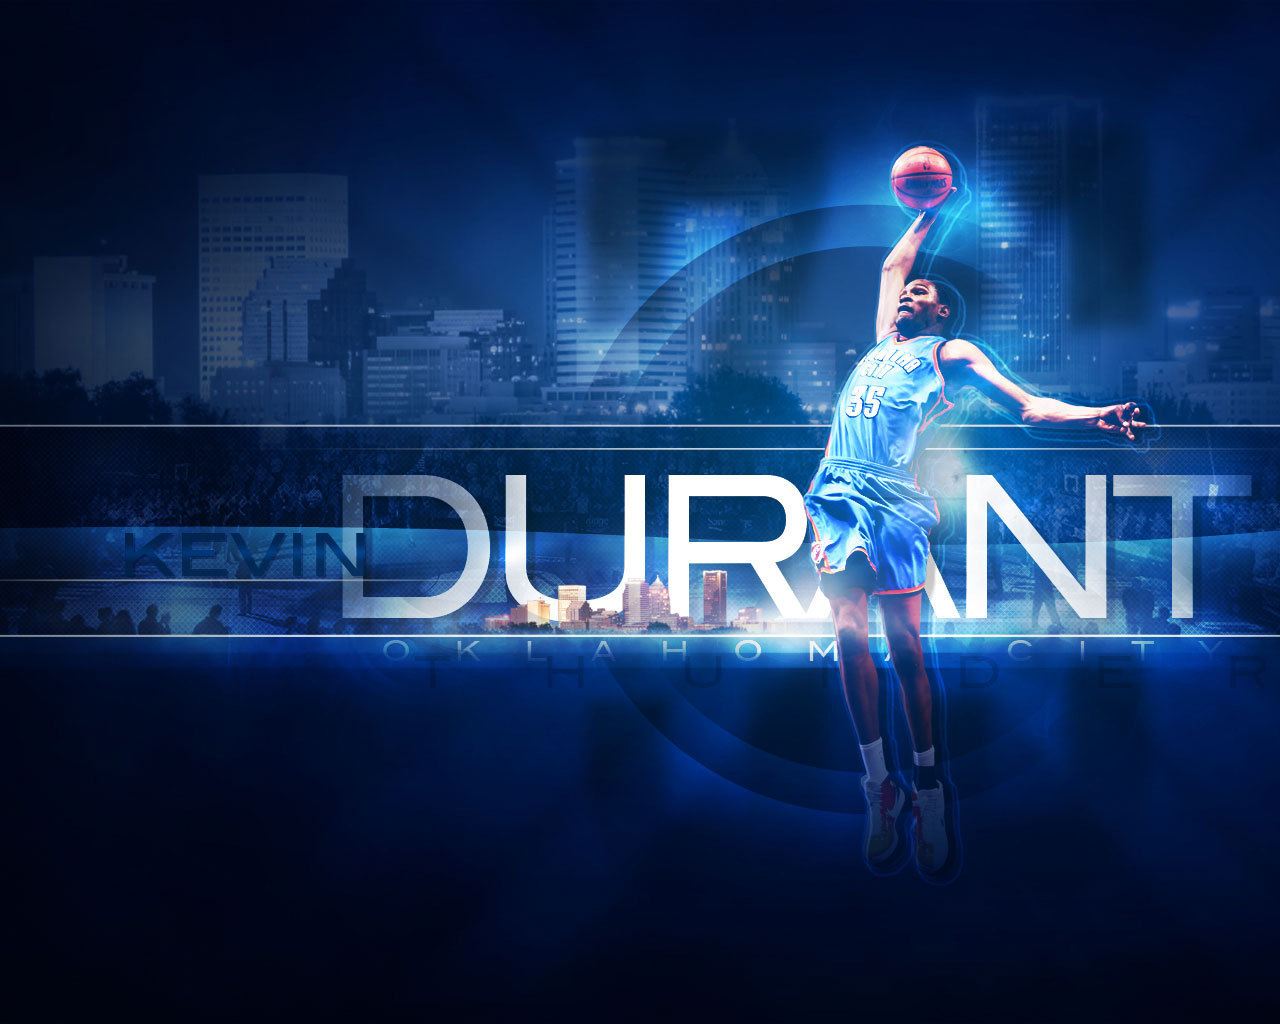 Nice Background Kevin Durant Wallpaper